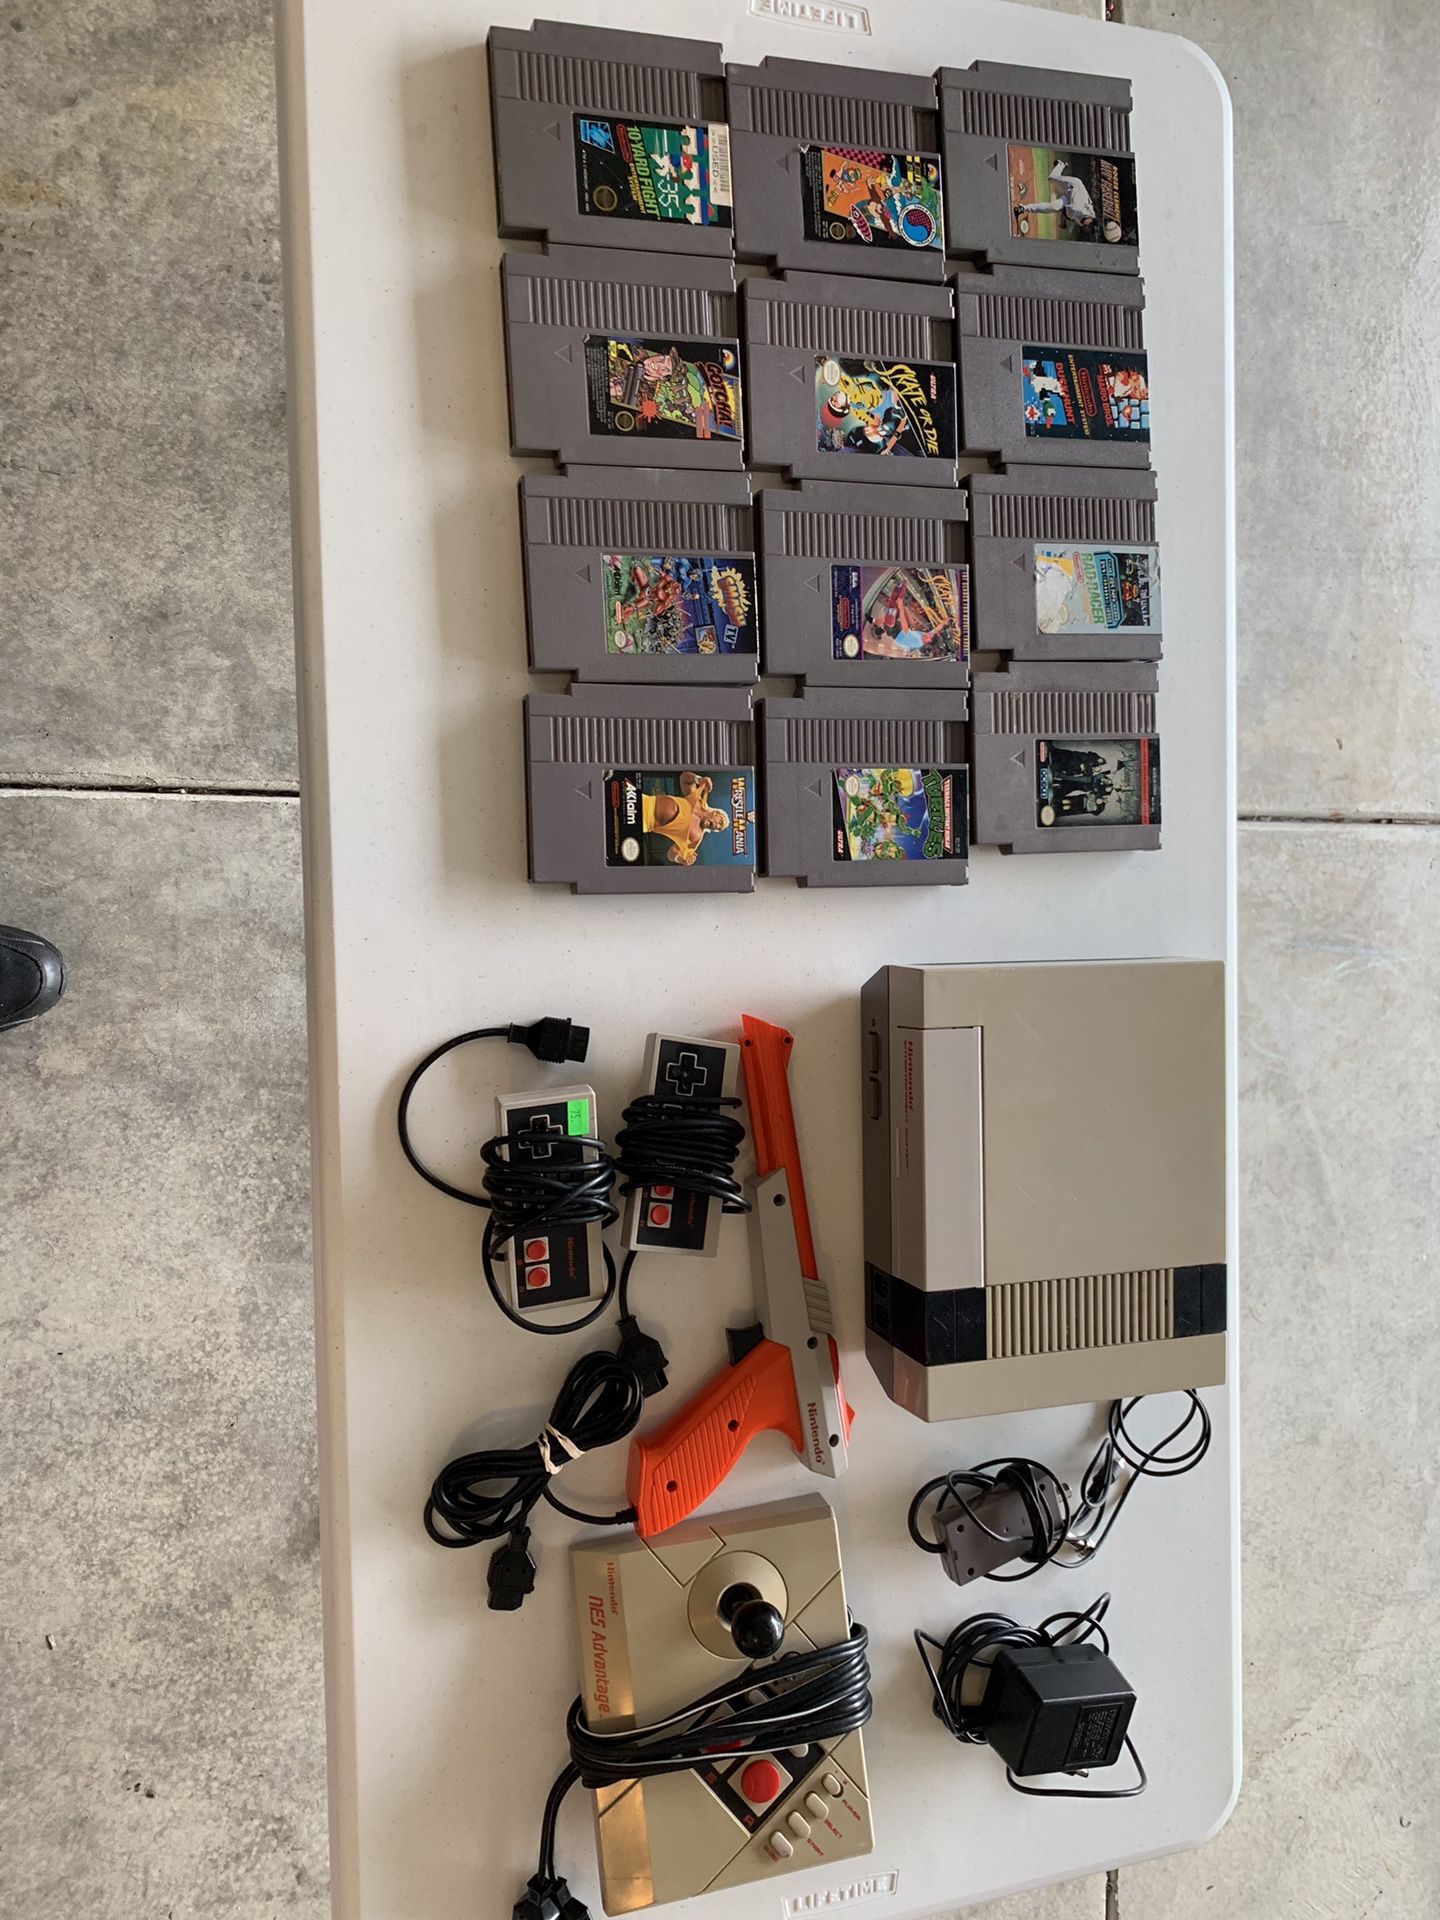 (NES) Nintendo Entertainment System and 12 games